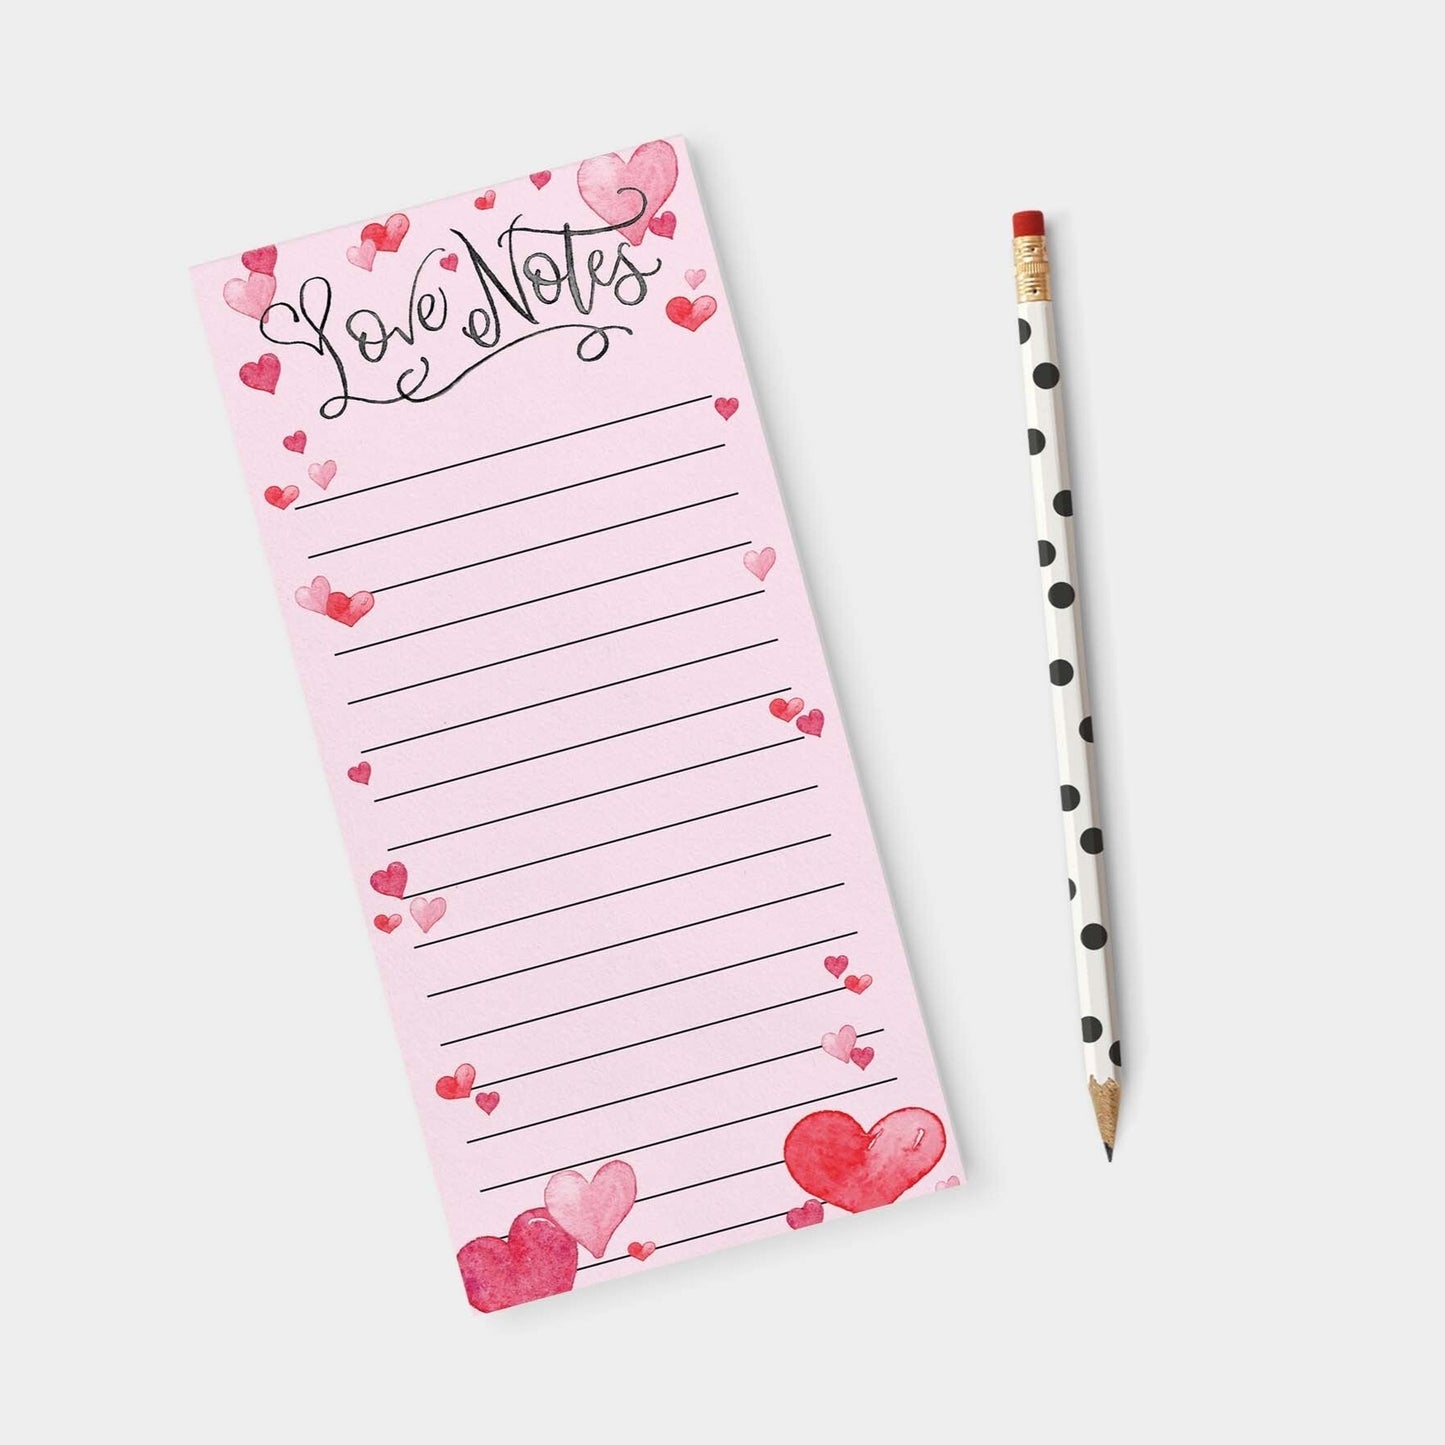 Love Notes Valentine's Day Note Pad